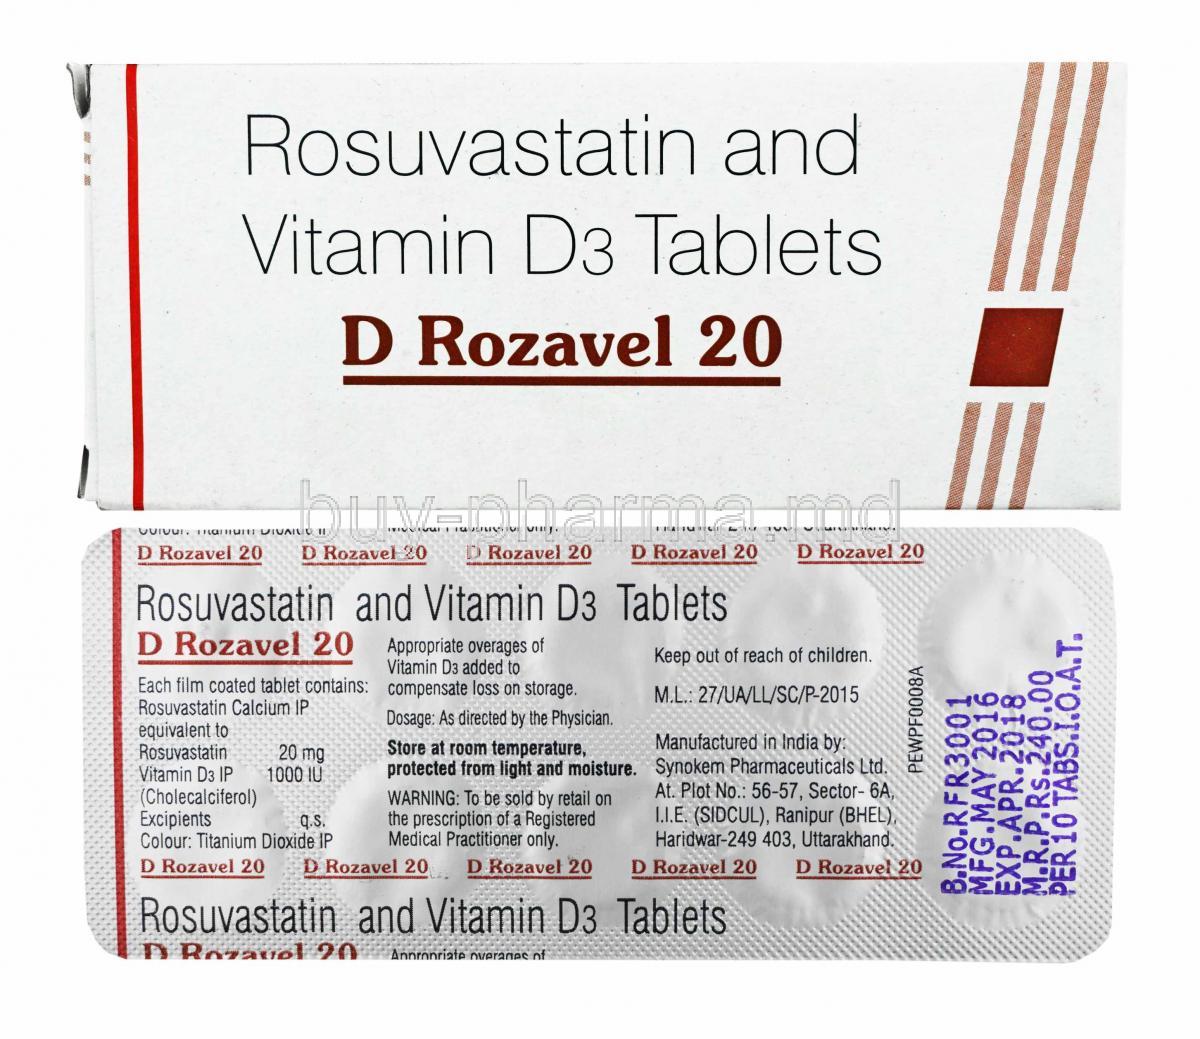 D Rozavel, Rosuvastatin and Vitamin D3 box and tablets